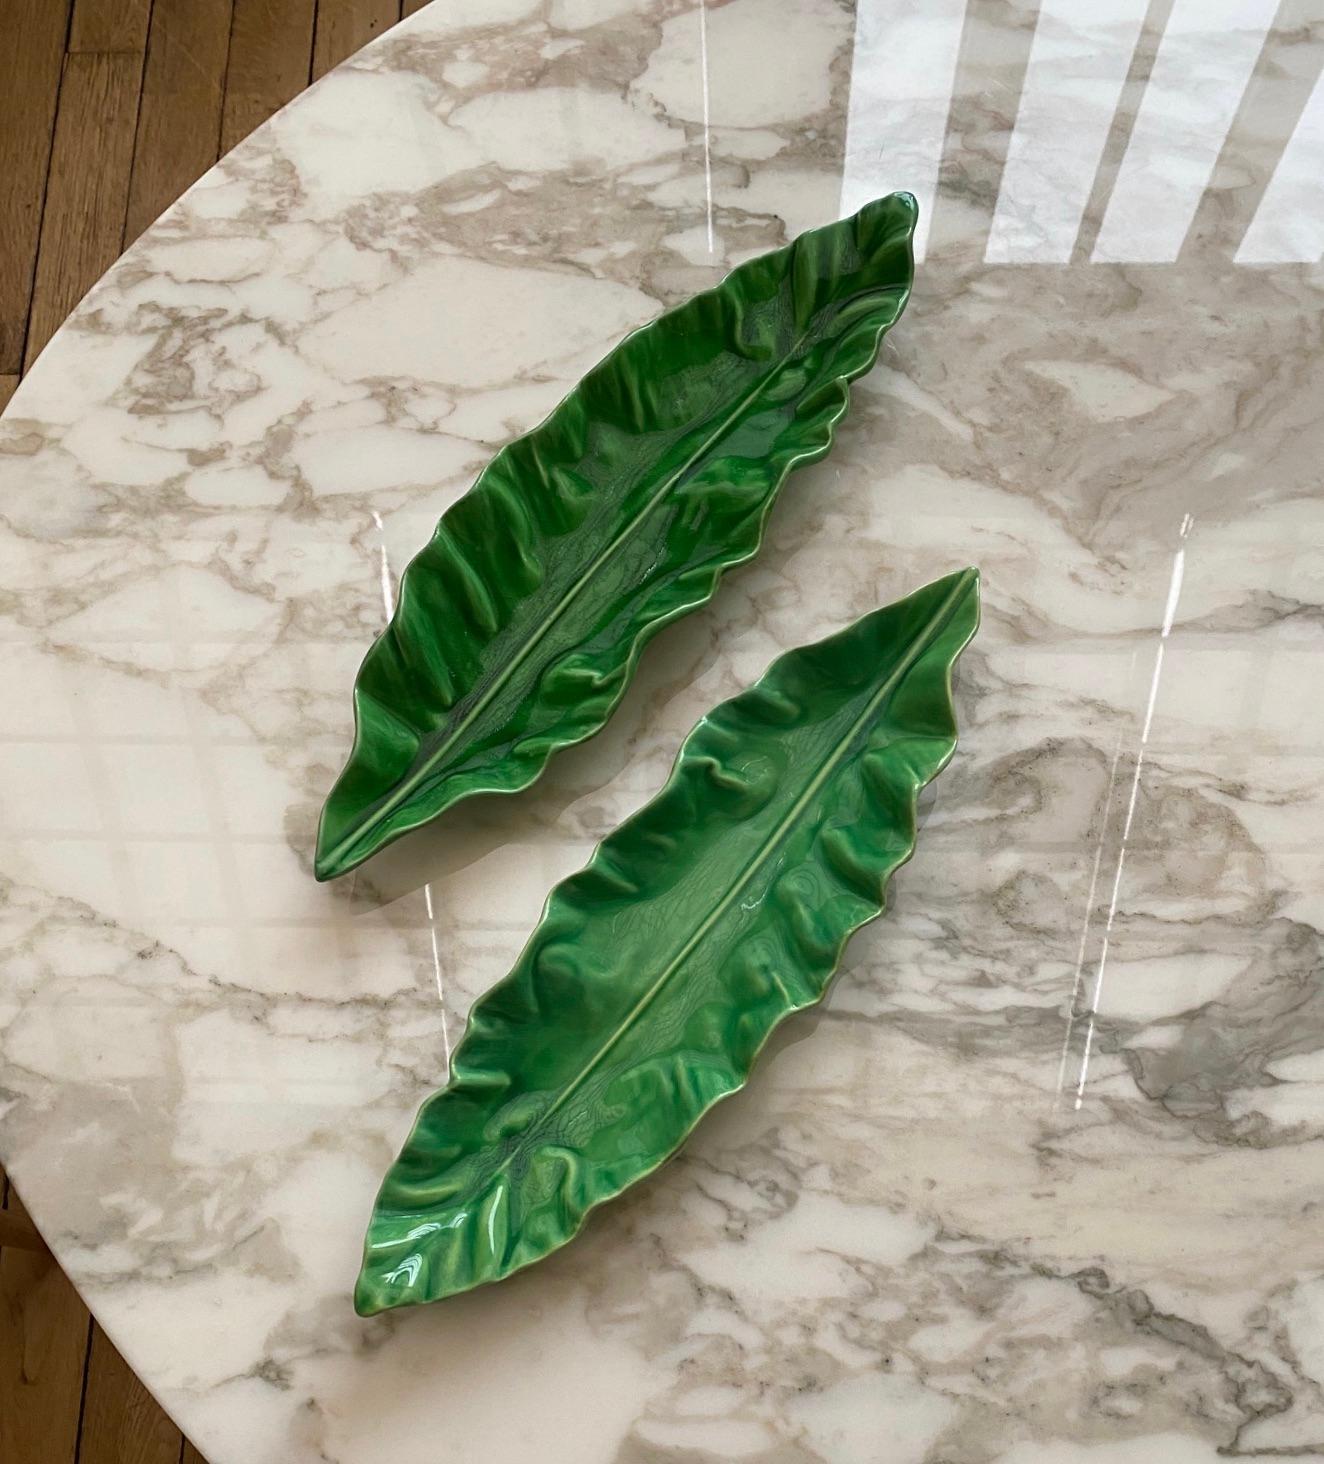 European Set of 2 Ceramic Green Leaves Dishes by Pol Chambost 1950s